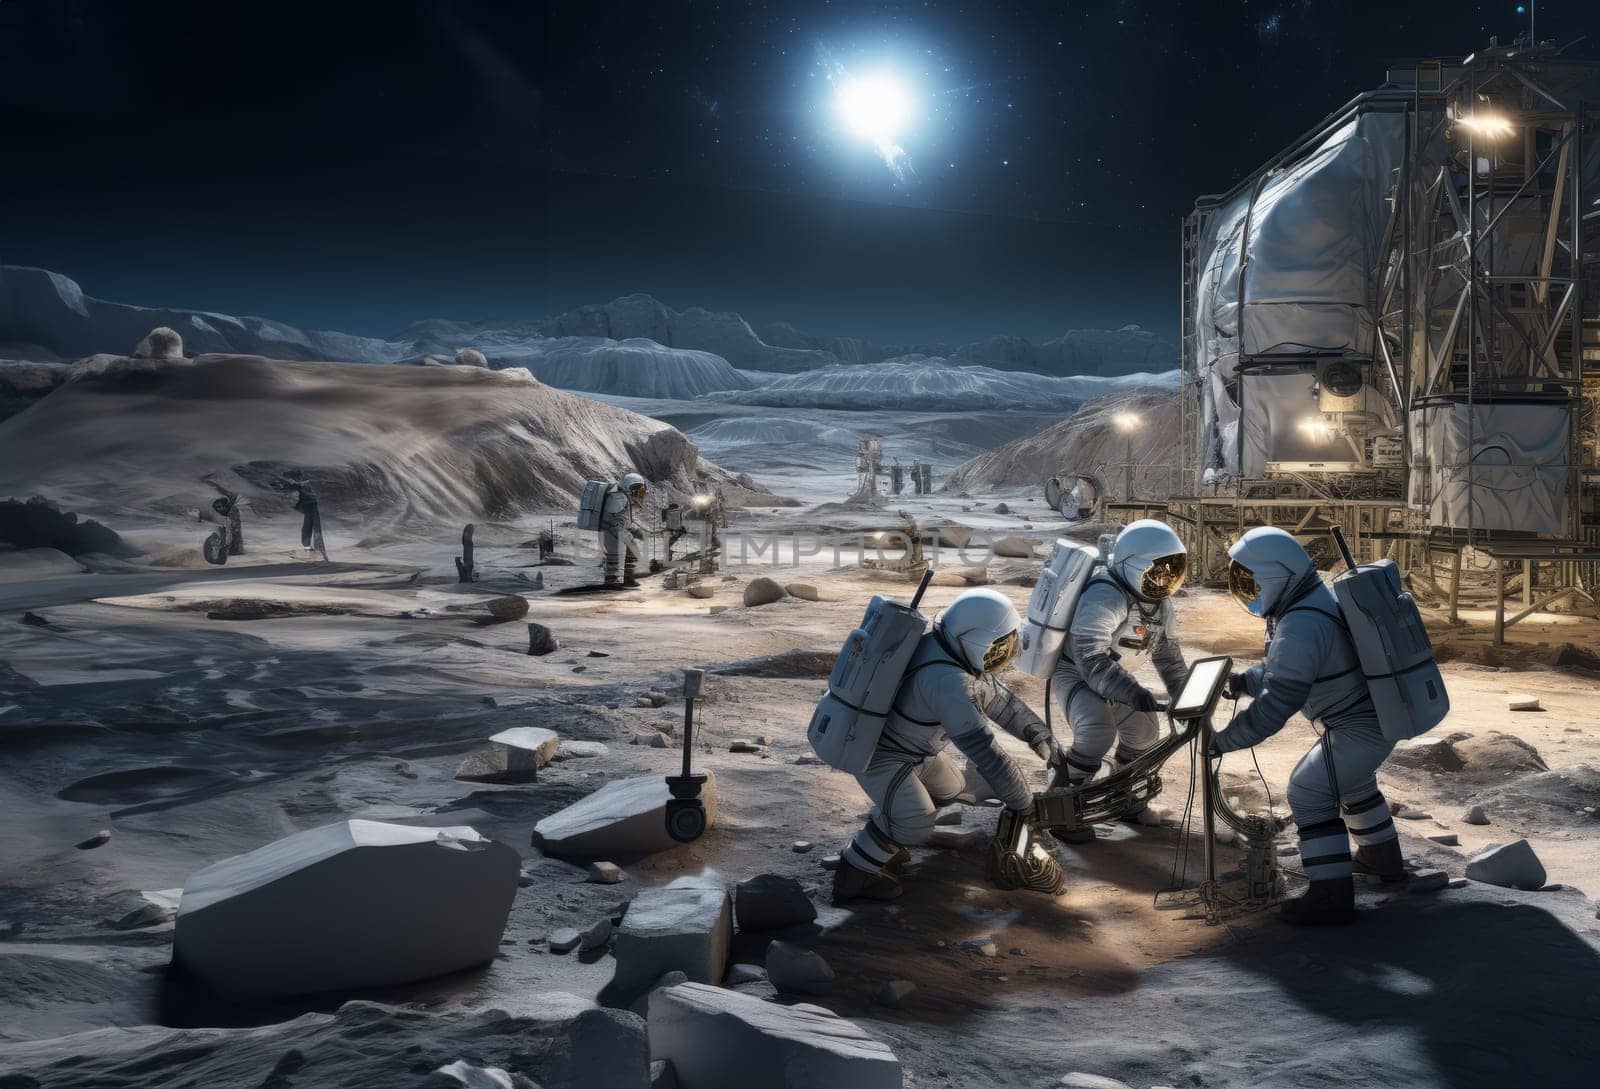 In a historic endeavor, a team of specialized astronauts works diligently on constructing a space station on the surface of Mars, pushing the boundaries of human exploration and scientific achievement.